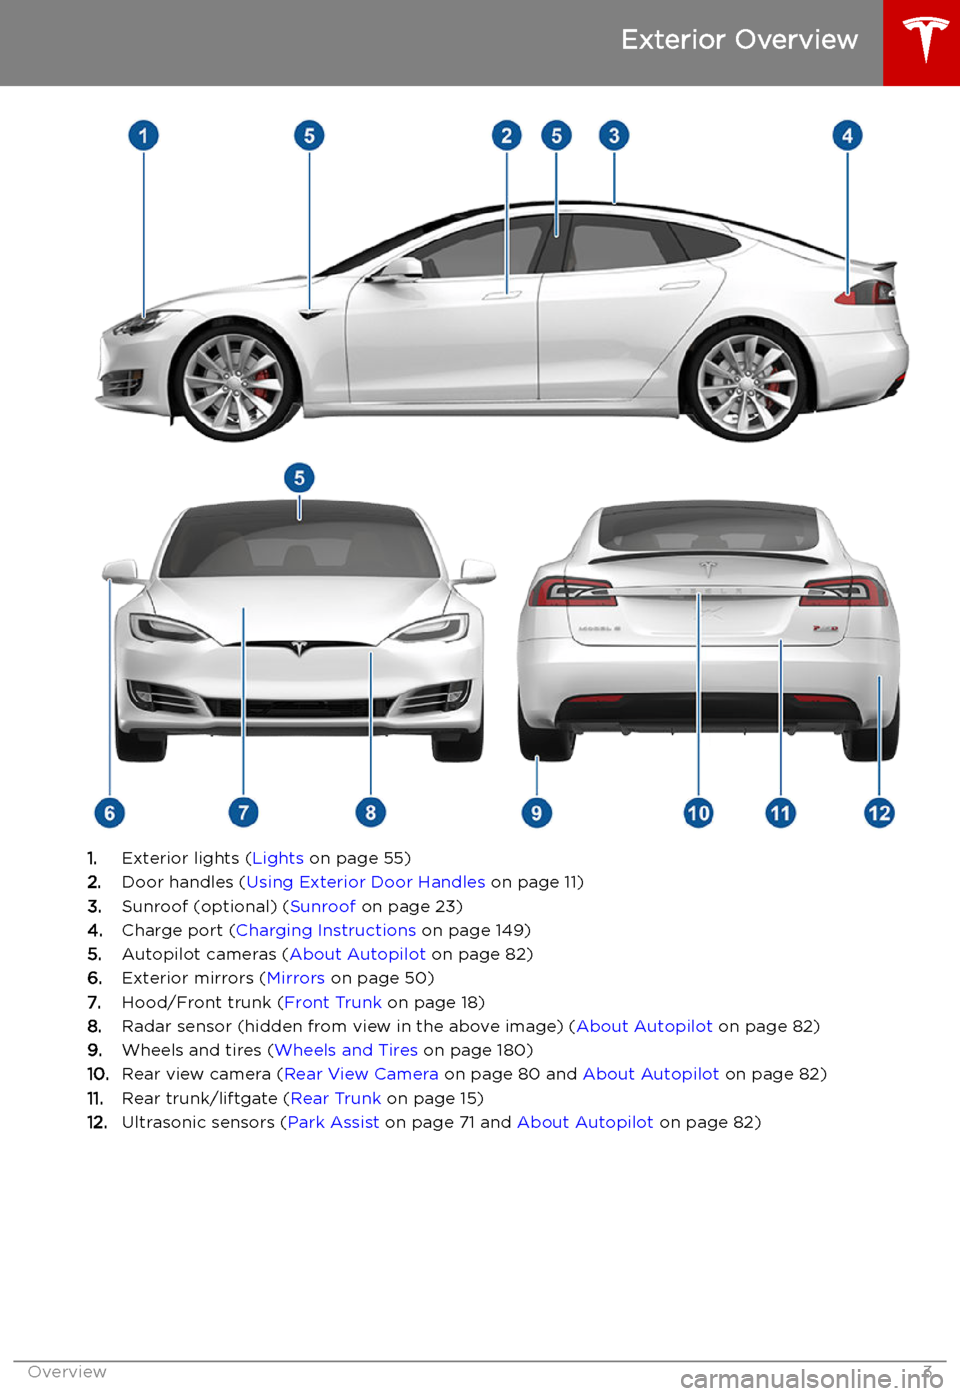 TESLA MODEL S 2019  Owners Manual Exterior Overview
1.Exterior lights ( Lights on page 55)
2. Door handles ( Using Exterior Door Handles  on page 11)
3. Sunroof (optional) ( Sunroof on page 23)
4. Charge port ( Charging Instructions  